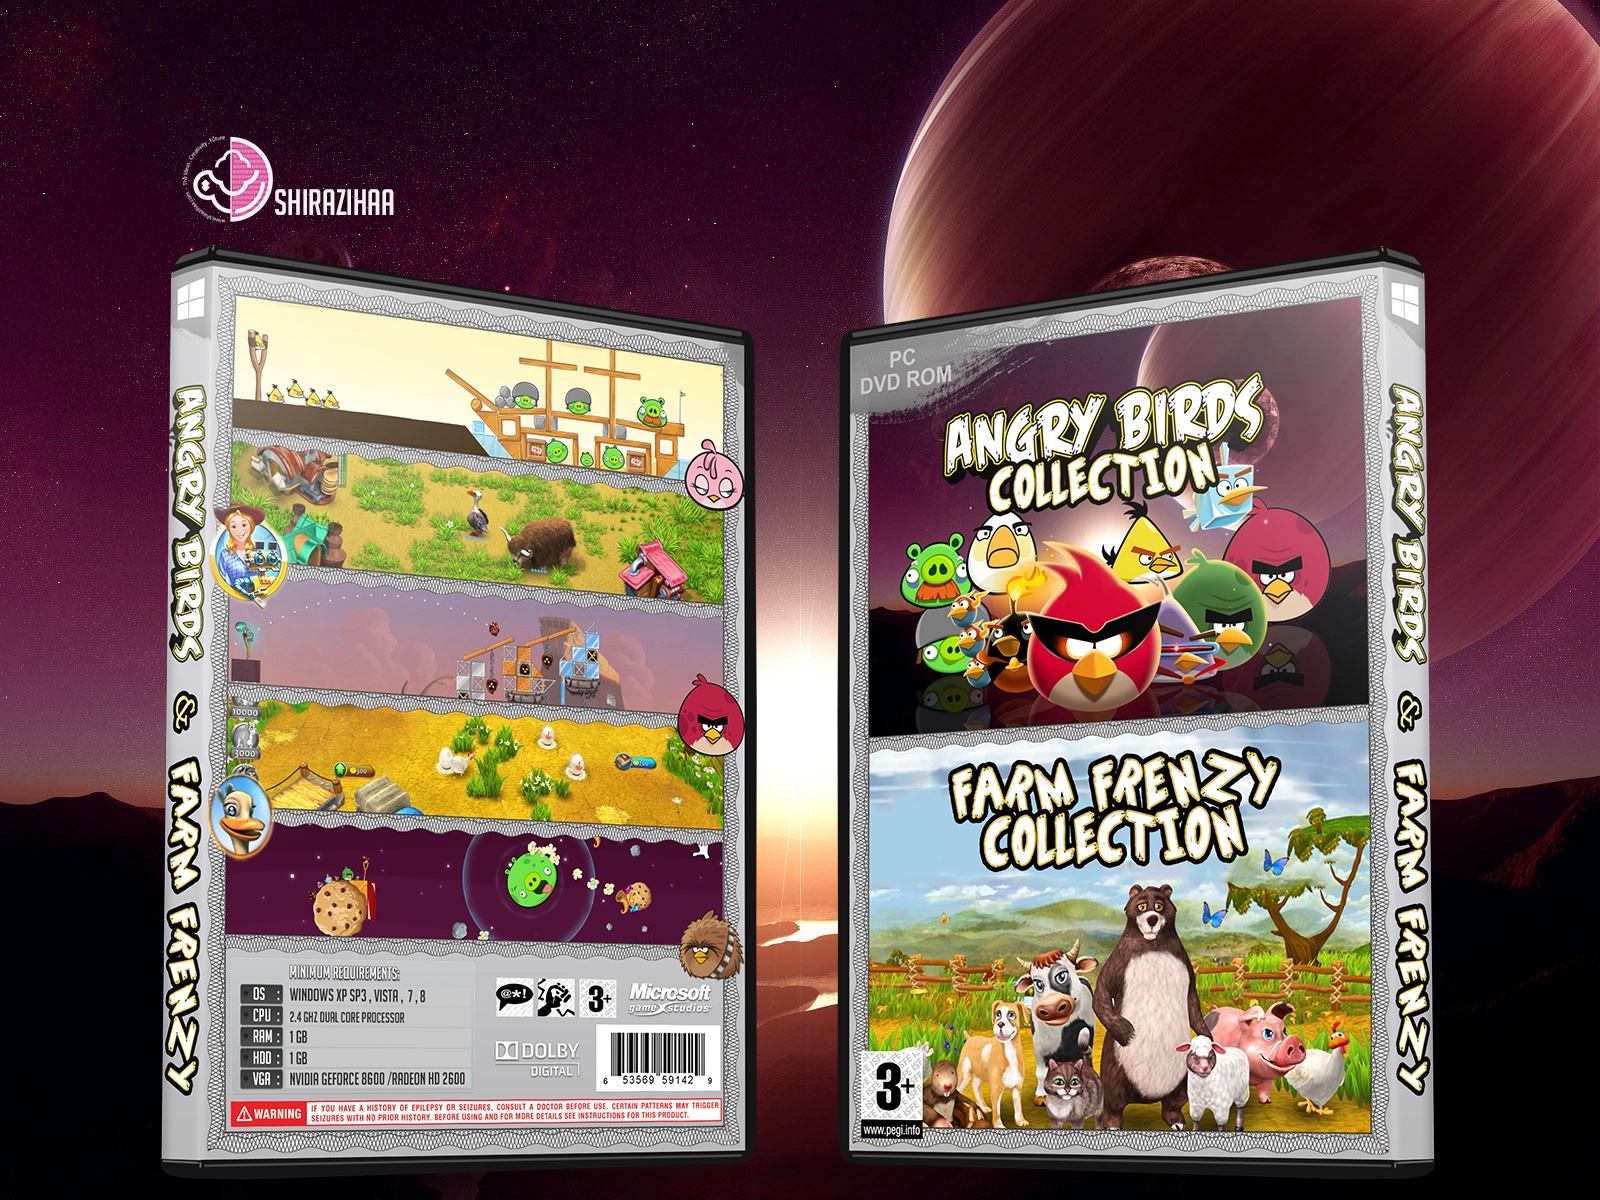 Angry Birds & Farm Frenzy Collection box cover